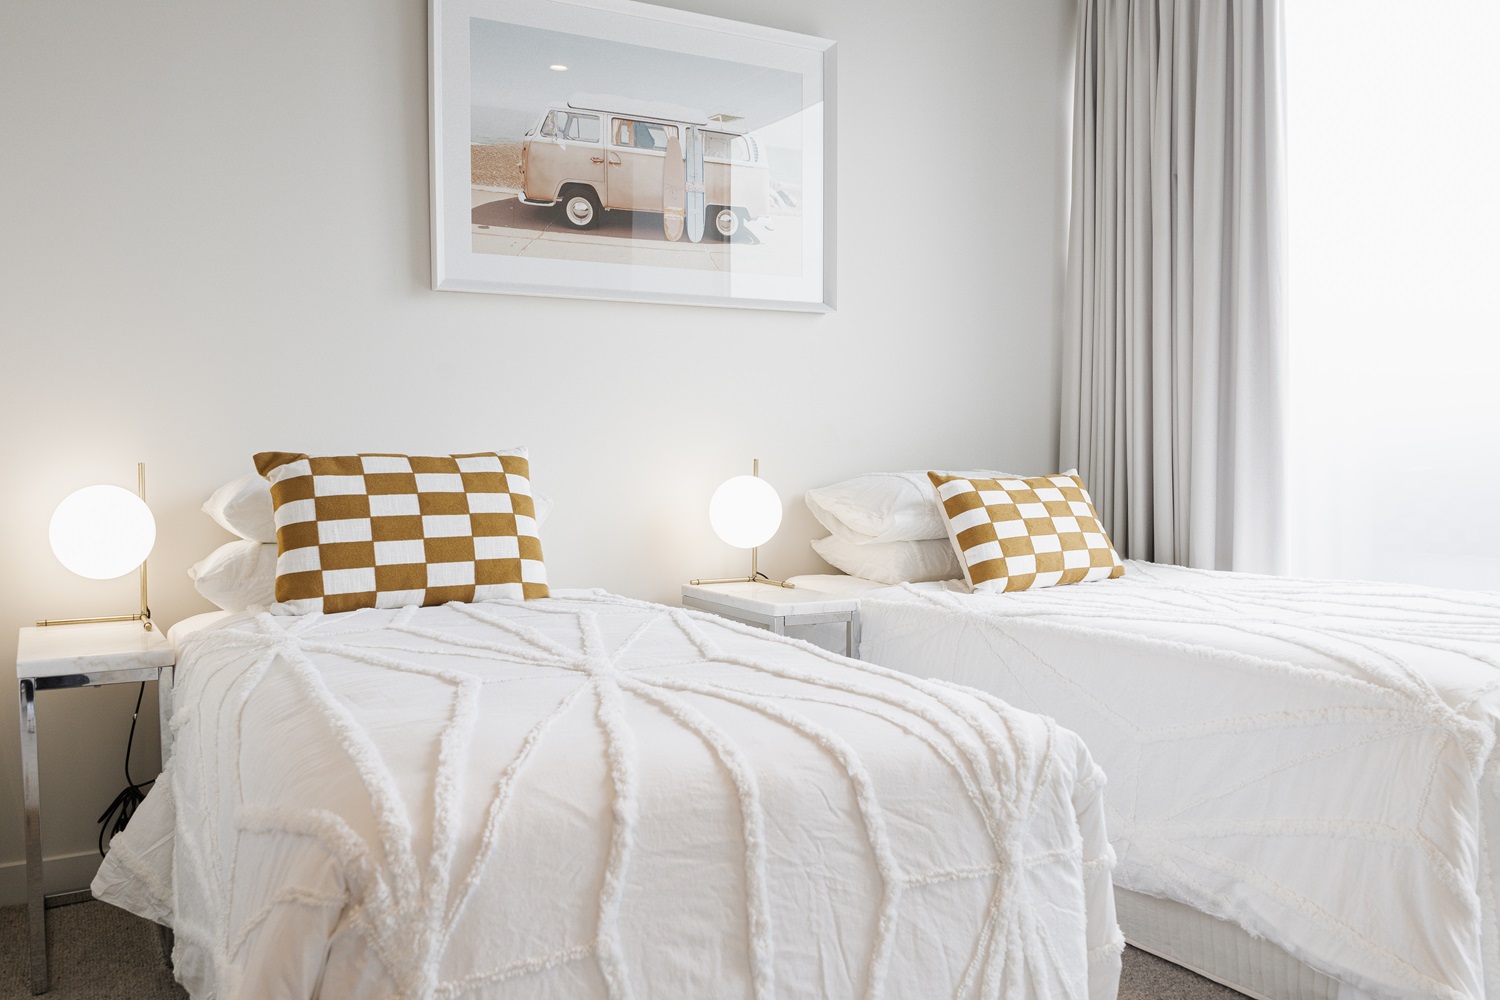 The Benefits of Choosing a Serviced Apartment Over a Hotel